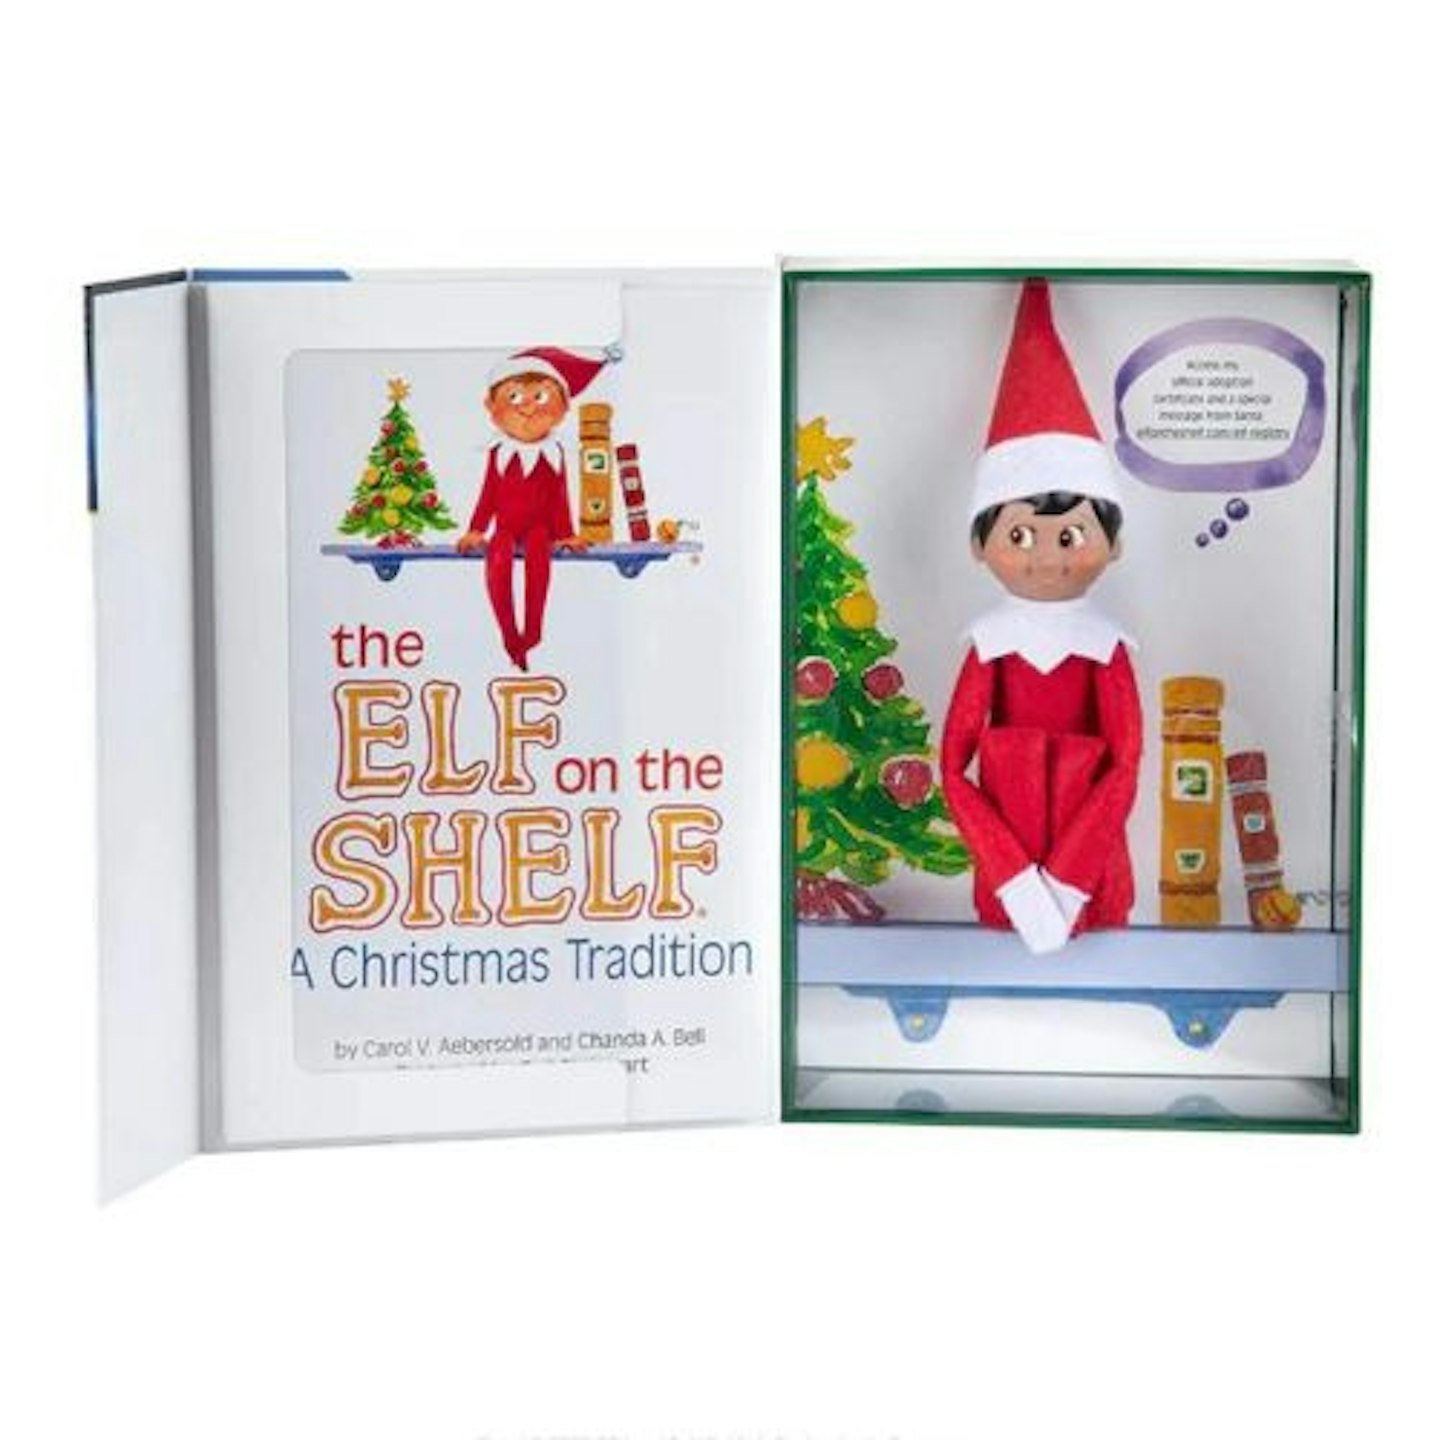 Best Elf on the Shelf props The Elf on the Shelf: A Christmas Tradition